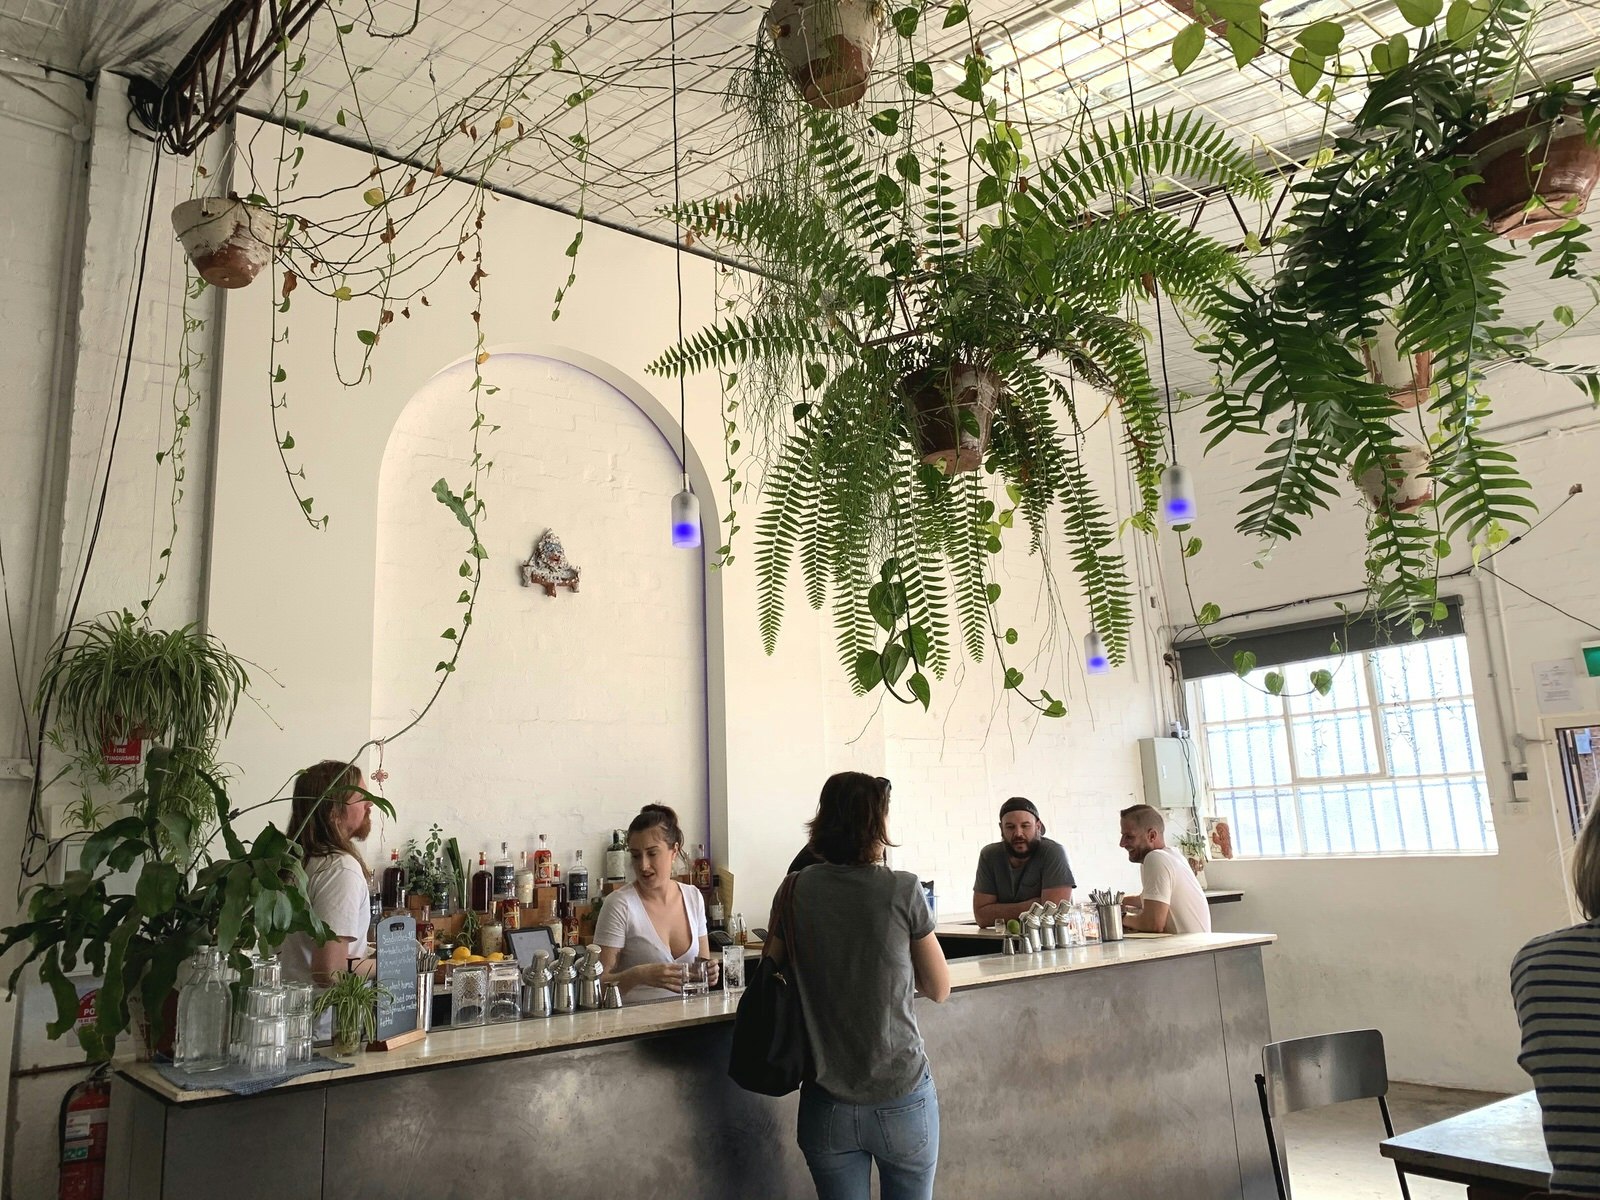 Several people mill around a concrete bar in a bright white room decorated with ferns and ivy hung from the ceiling. The minimalist bar is lined with bottles of gin.